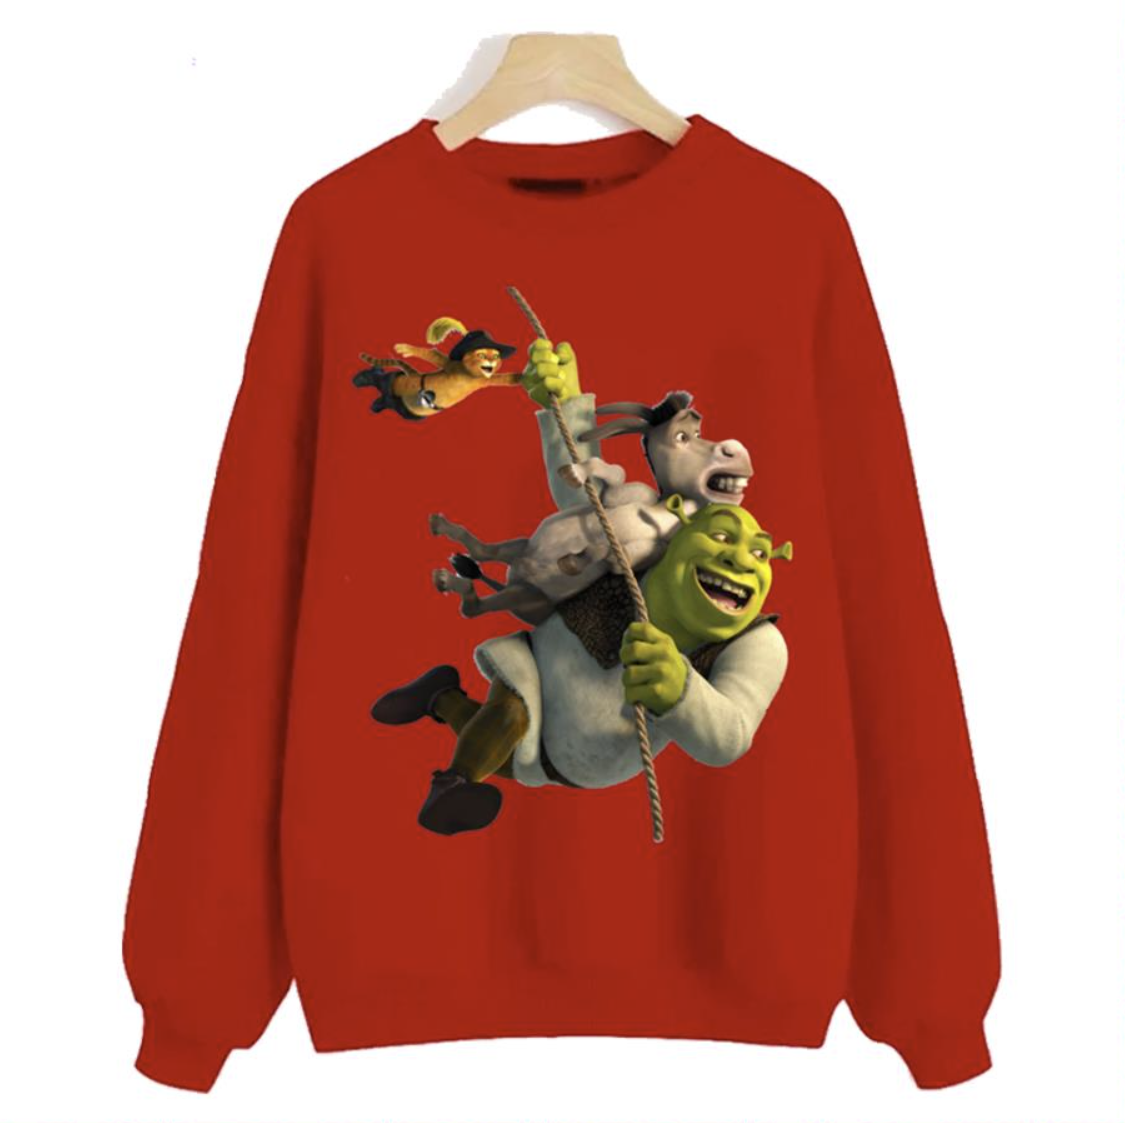 Shrek Donkey And Puss In Boots From Shrek Movie shirt